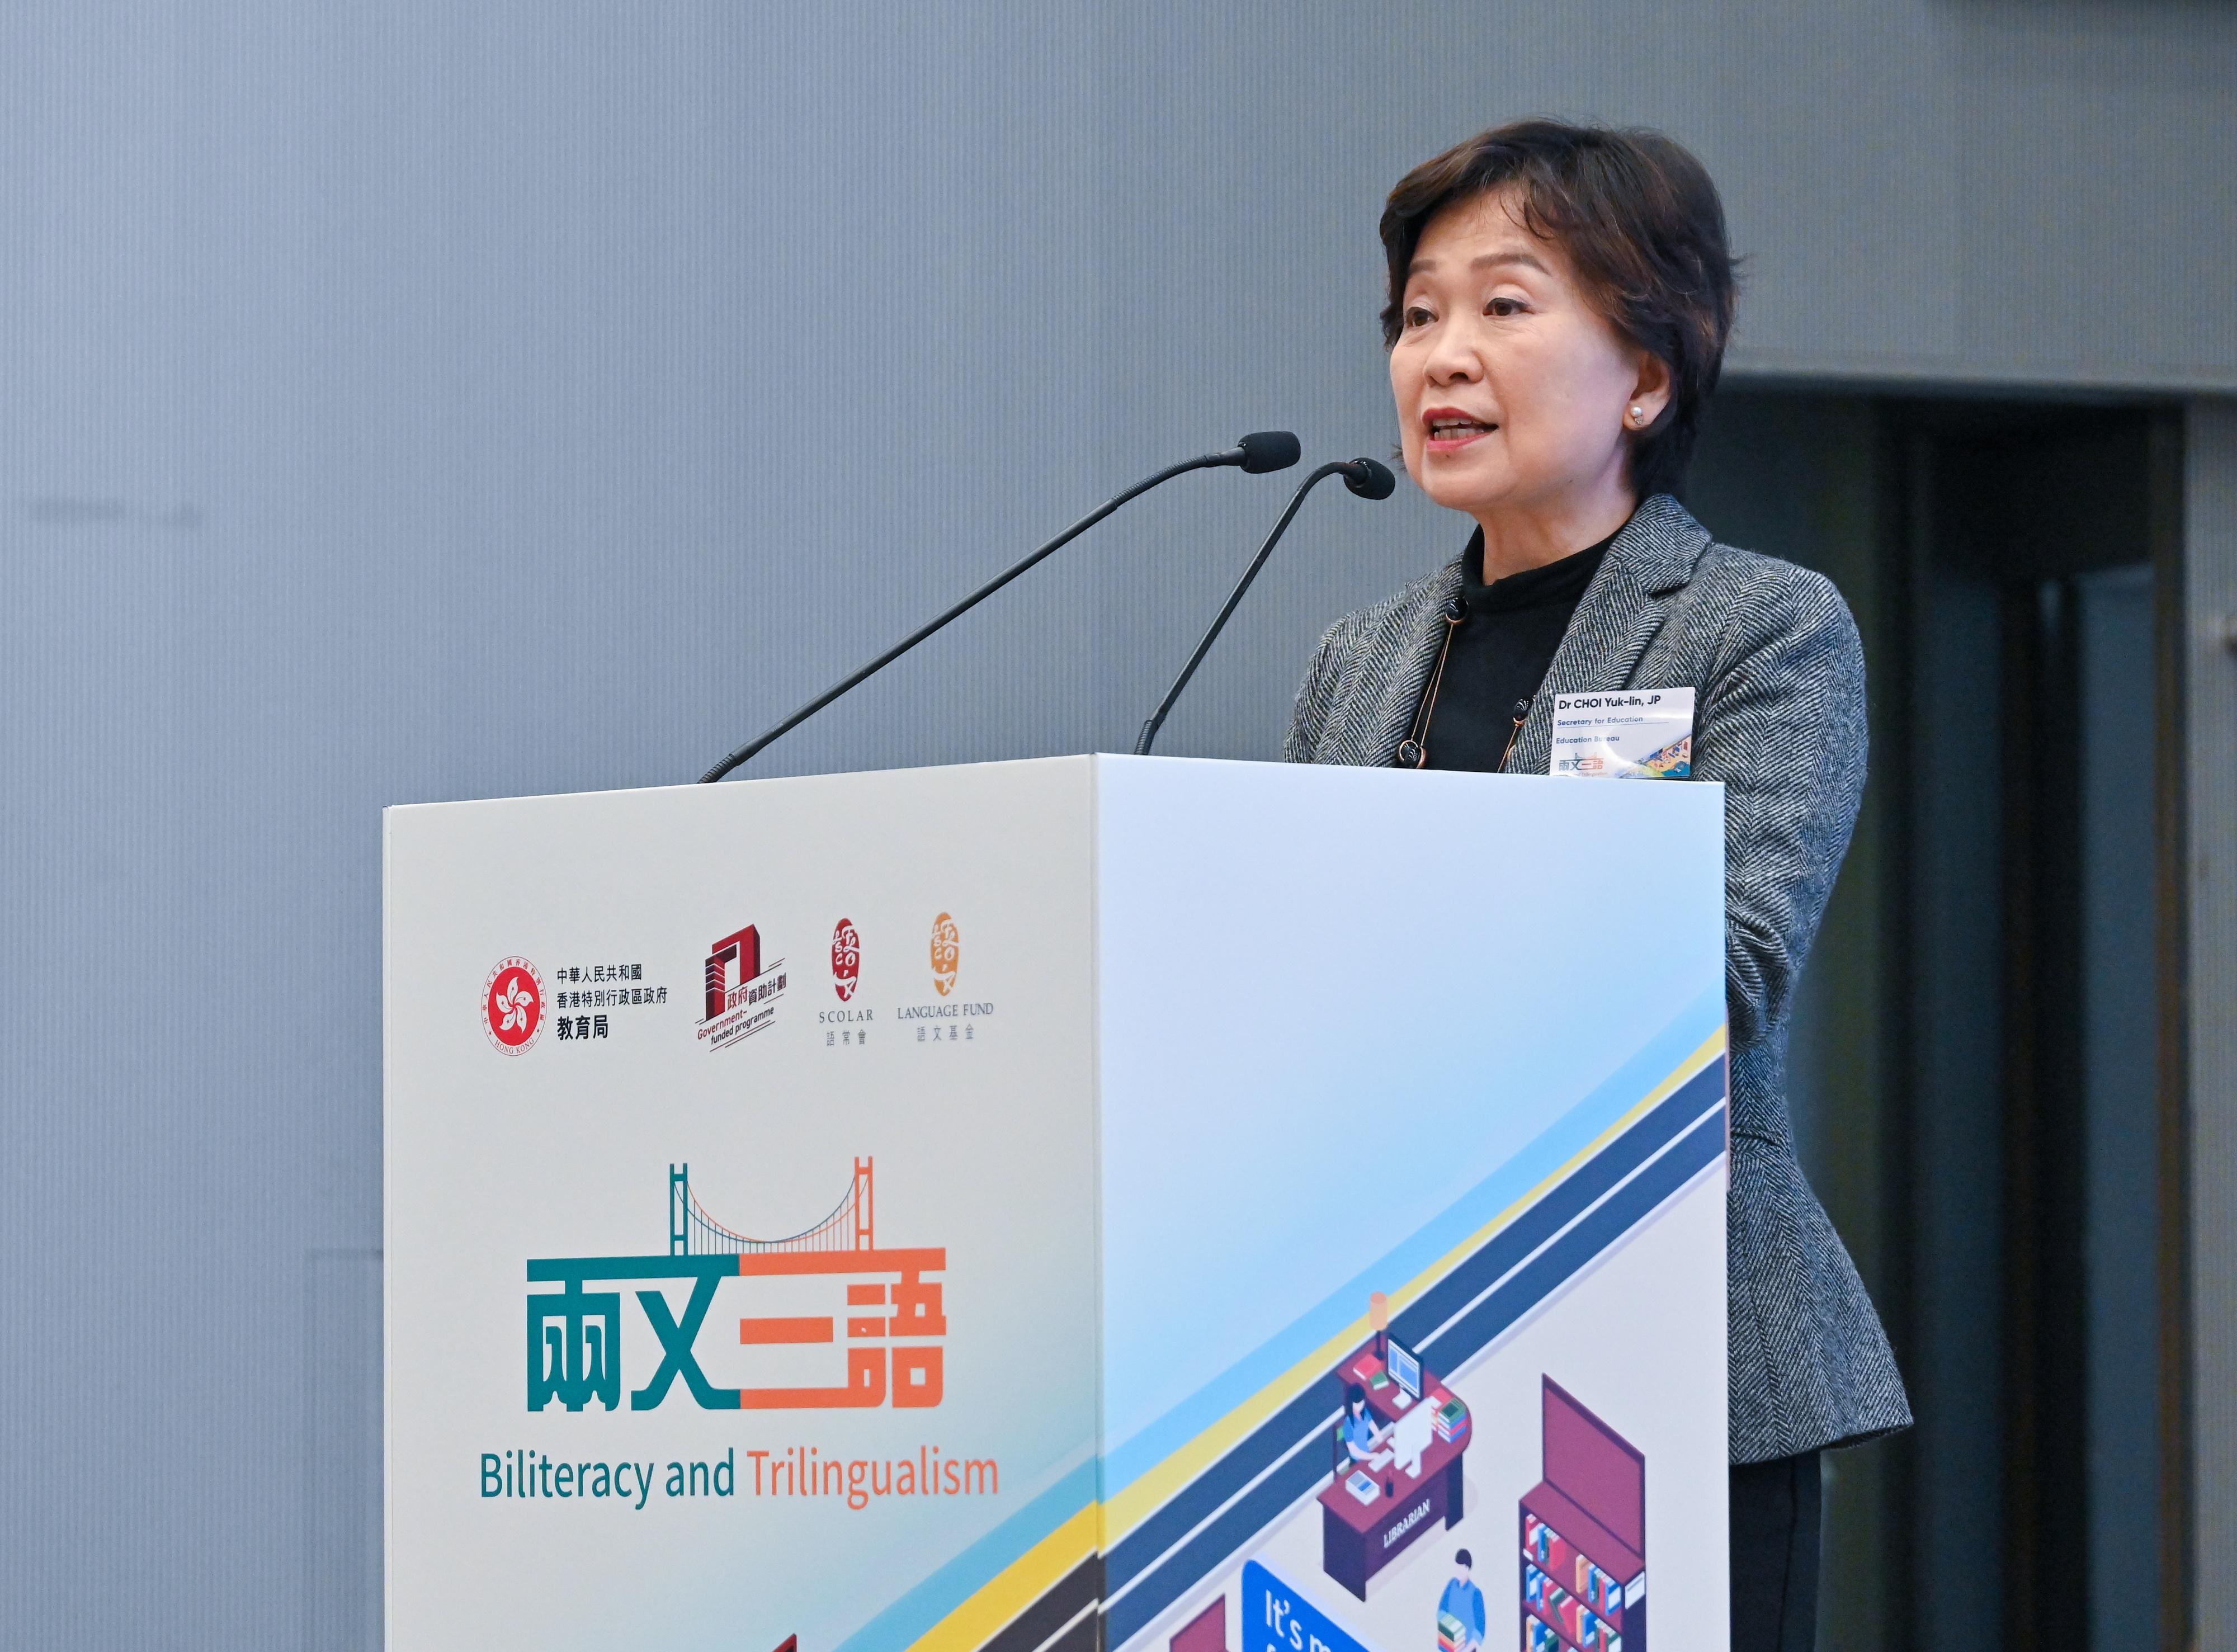 The Secretary for Education, Dr Choi Yuk-lin, speaks at the Opening Ceremony for the Biliteracy and Trilingualism Campaign today (December 19).